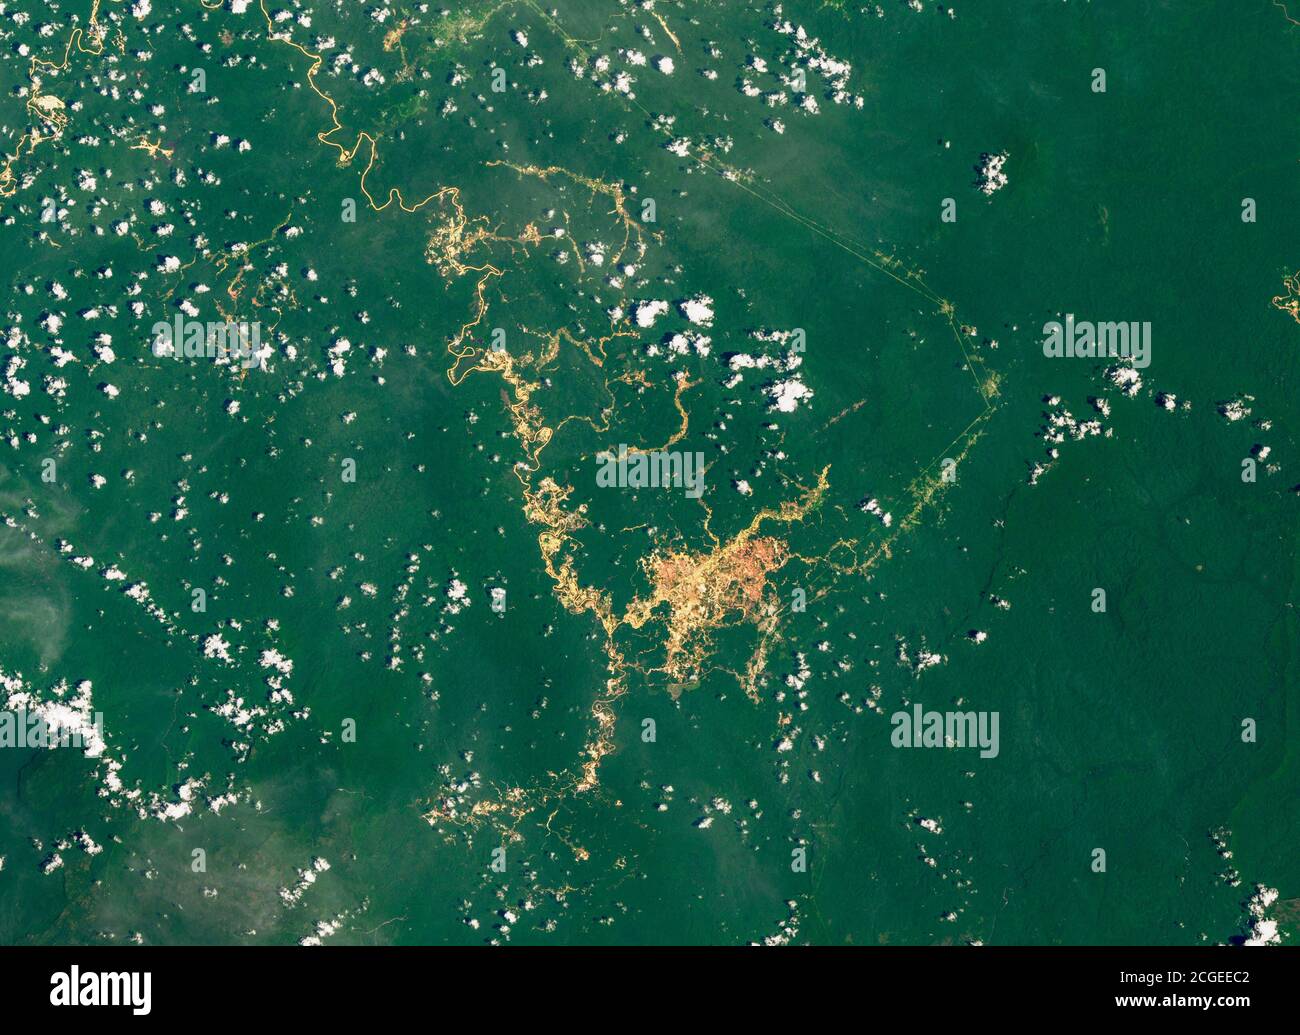 Deforestation in the Amazon showing scars of deforested areas Stock Photo